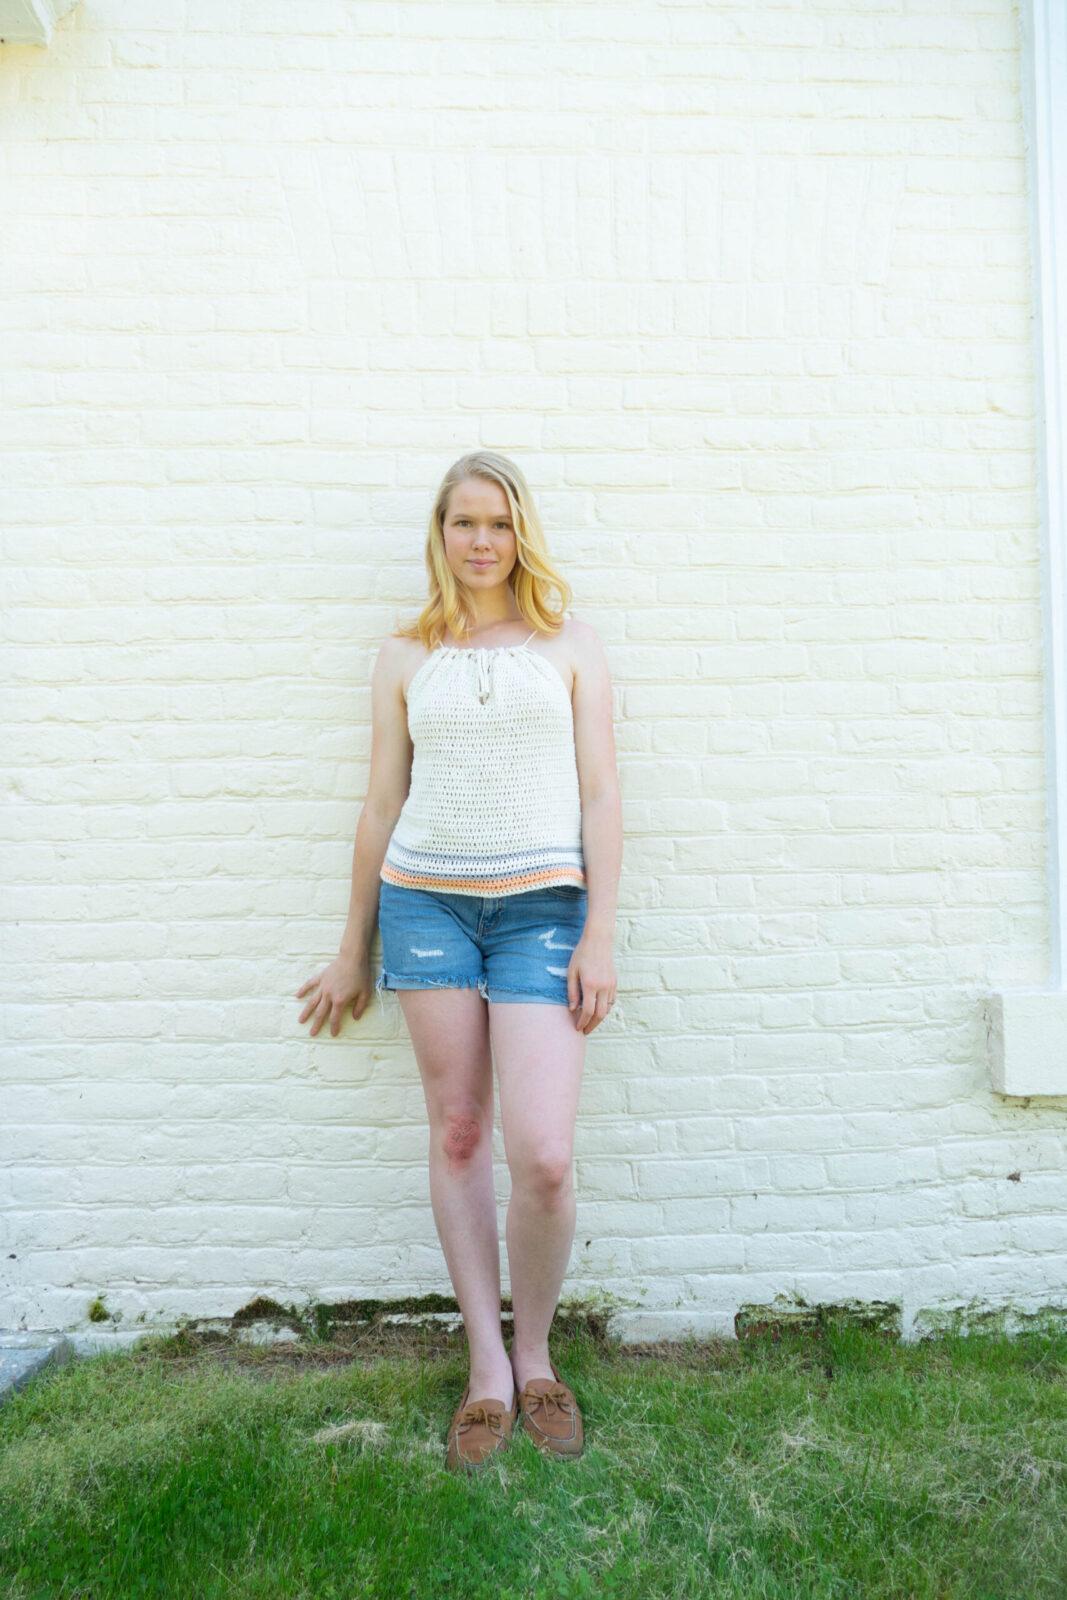 A blonde woman stands against a white brick wall. She is wearing jean shorts and a white crochet tank top.